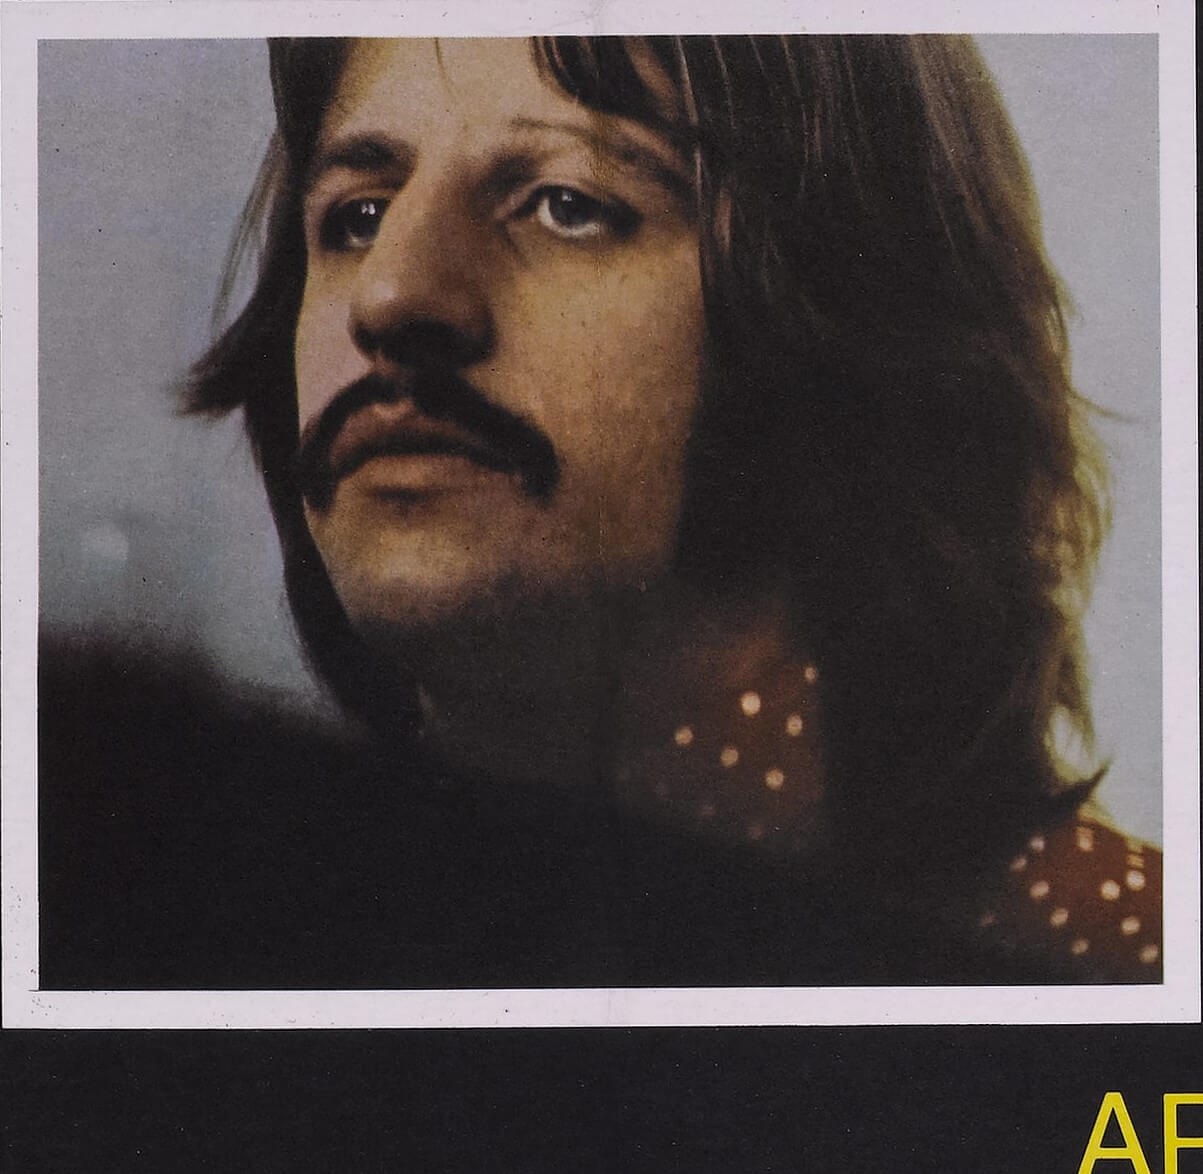 Ringo Starr on the cover of The Beatles' 'Let It Be'